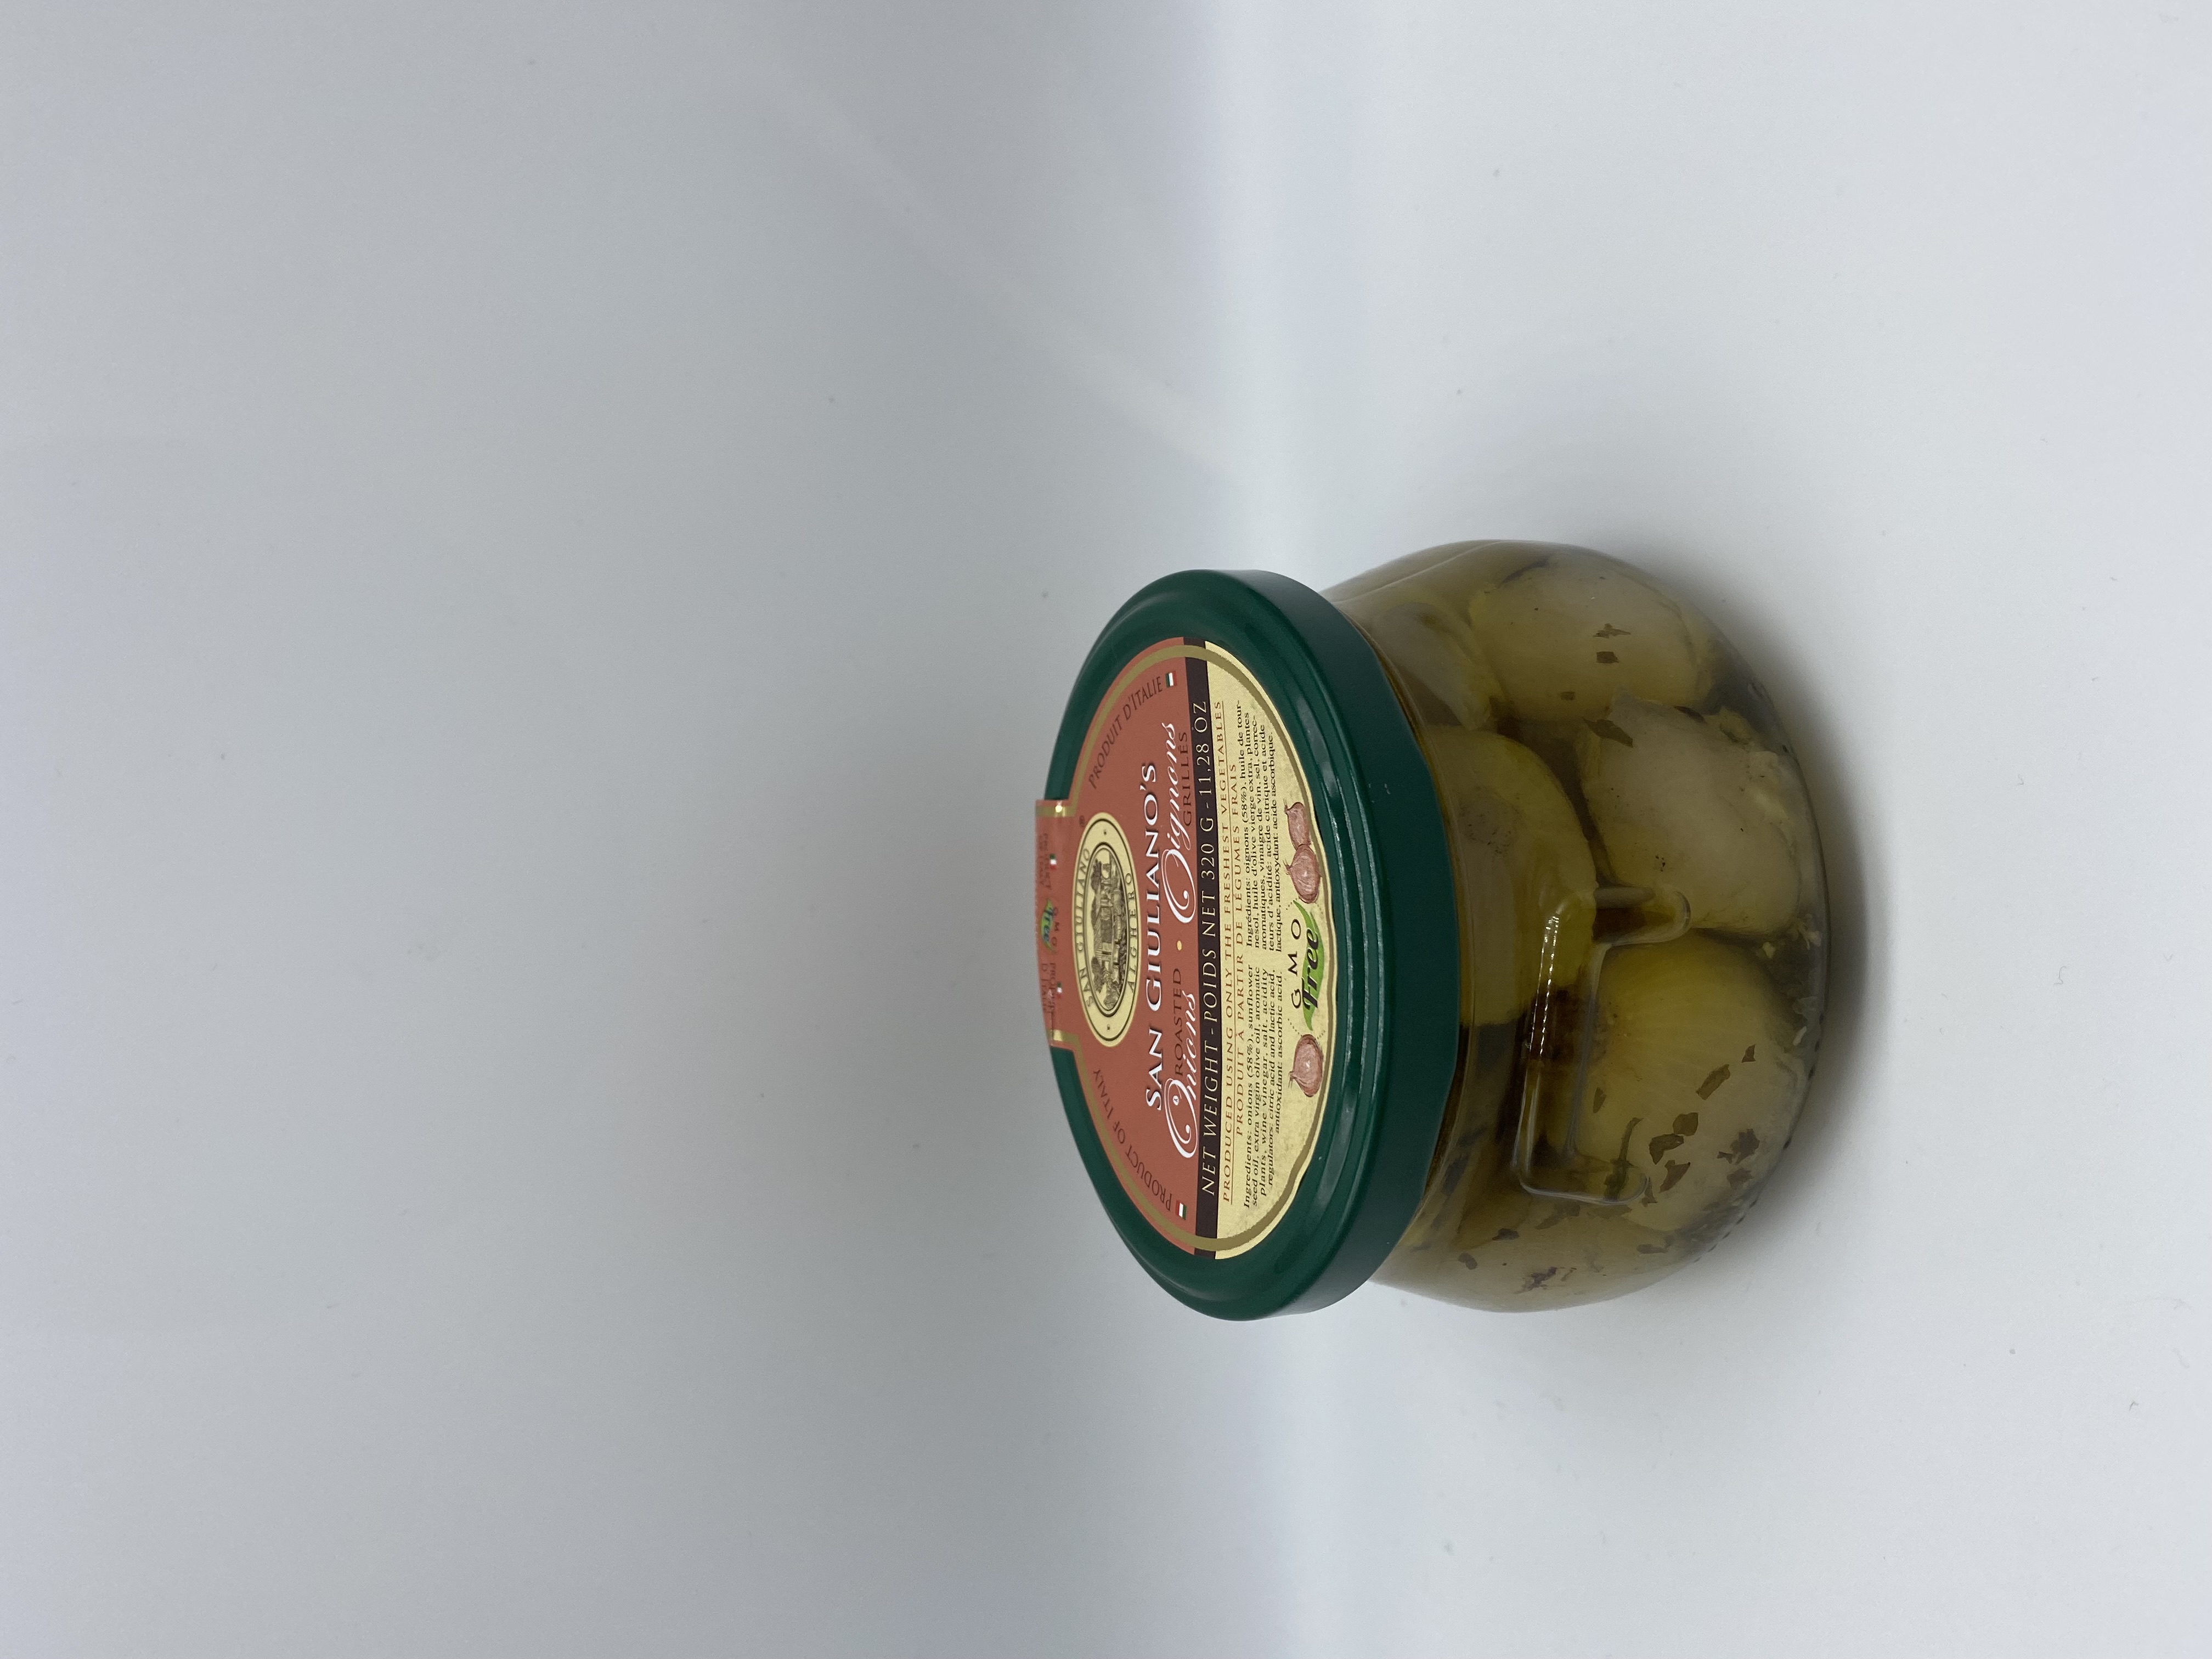 Product Image for San Giuliano's Roasted Onions